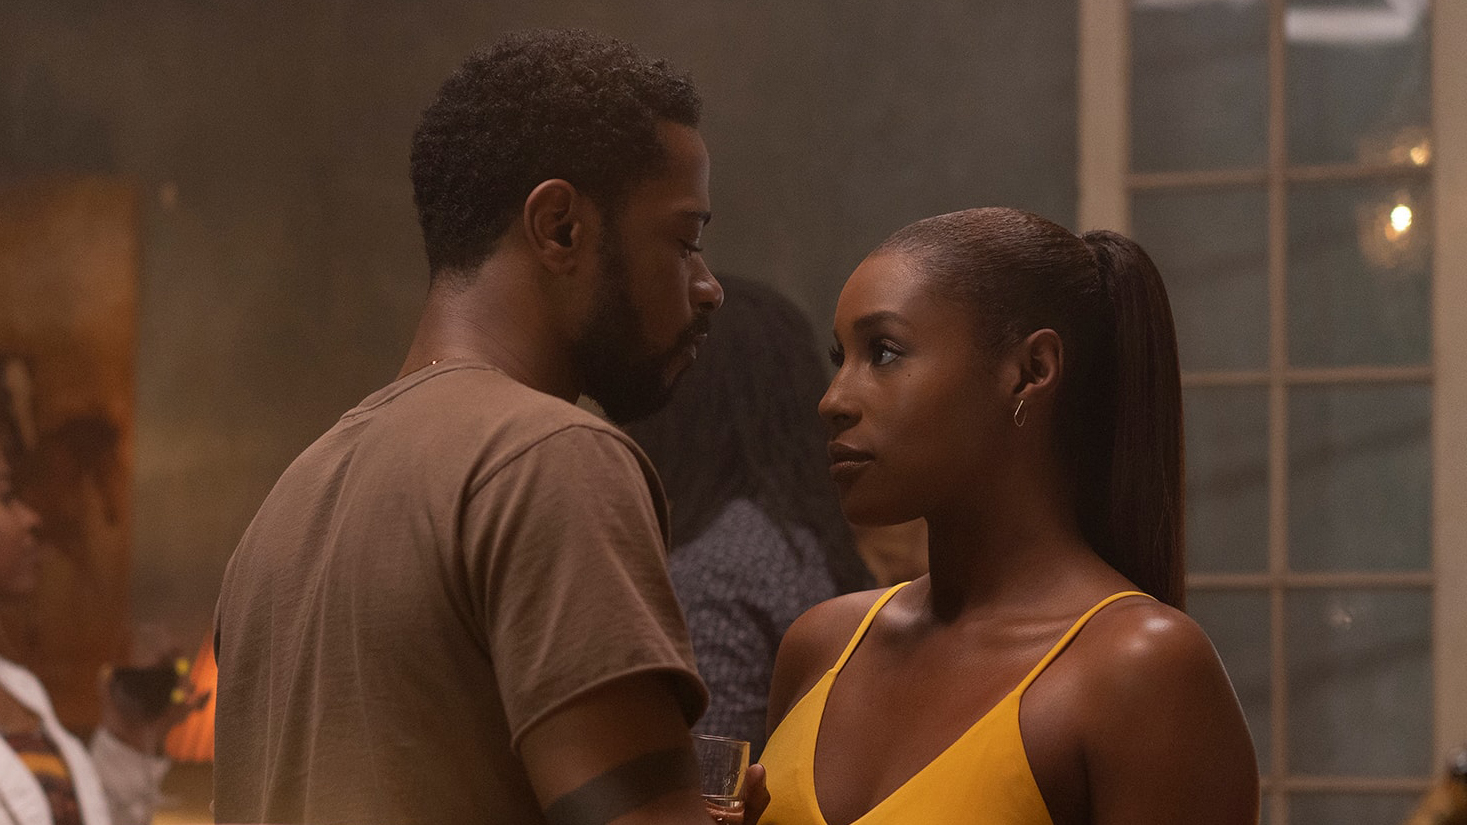 [WATCH] 'The Photograph' Trailer Starring Issa Rae and Lakeith Stanfield